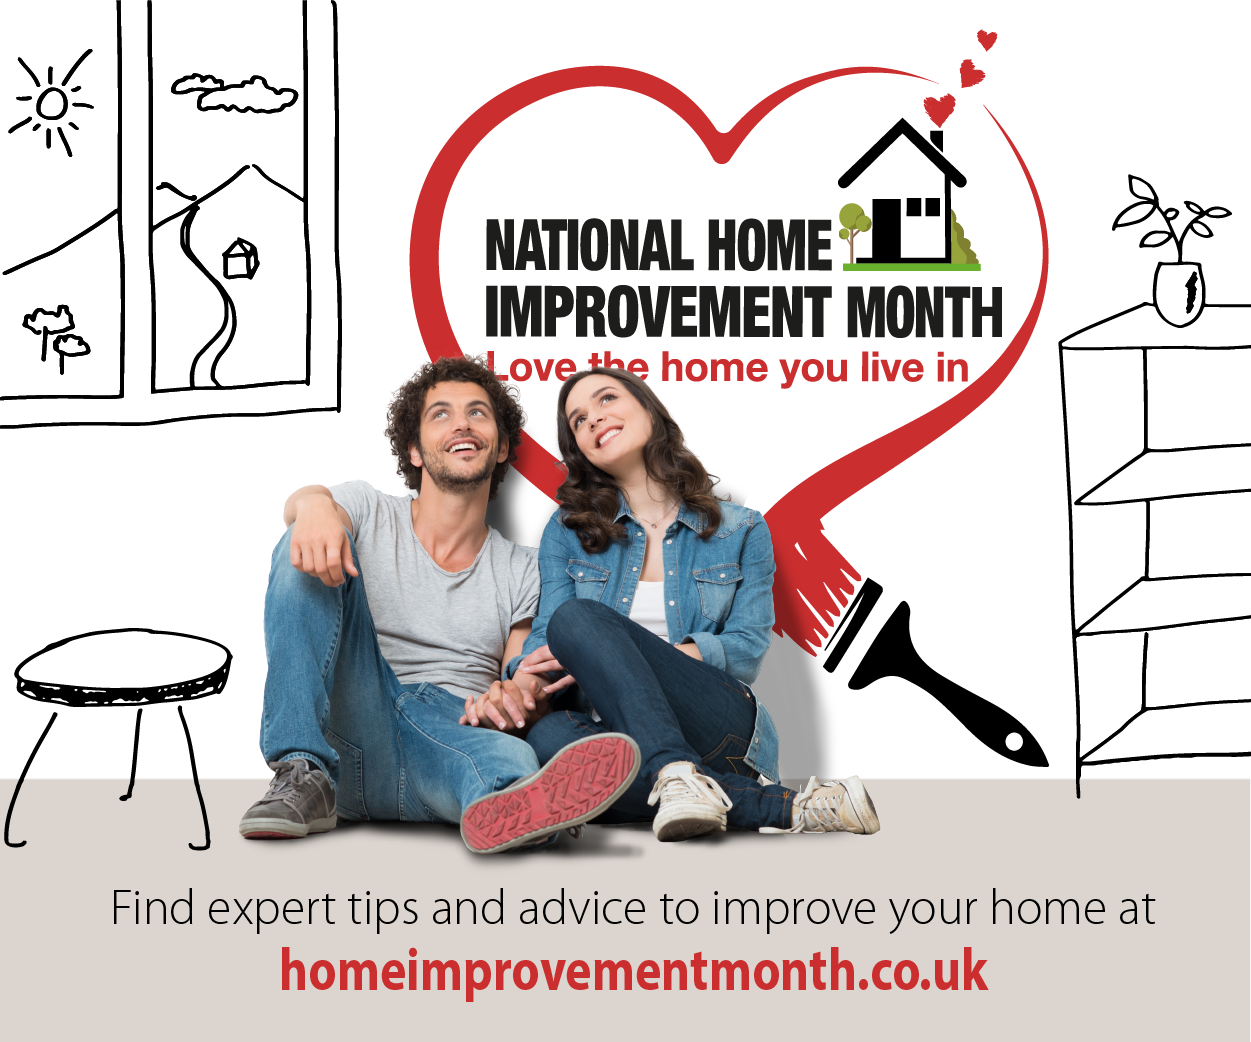 September is National Home Improvement Month